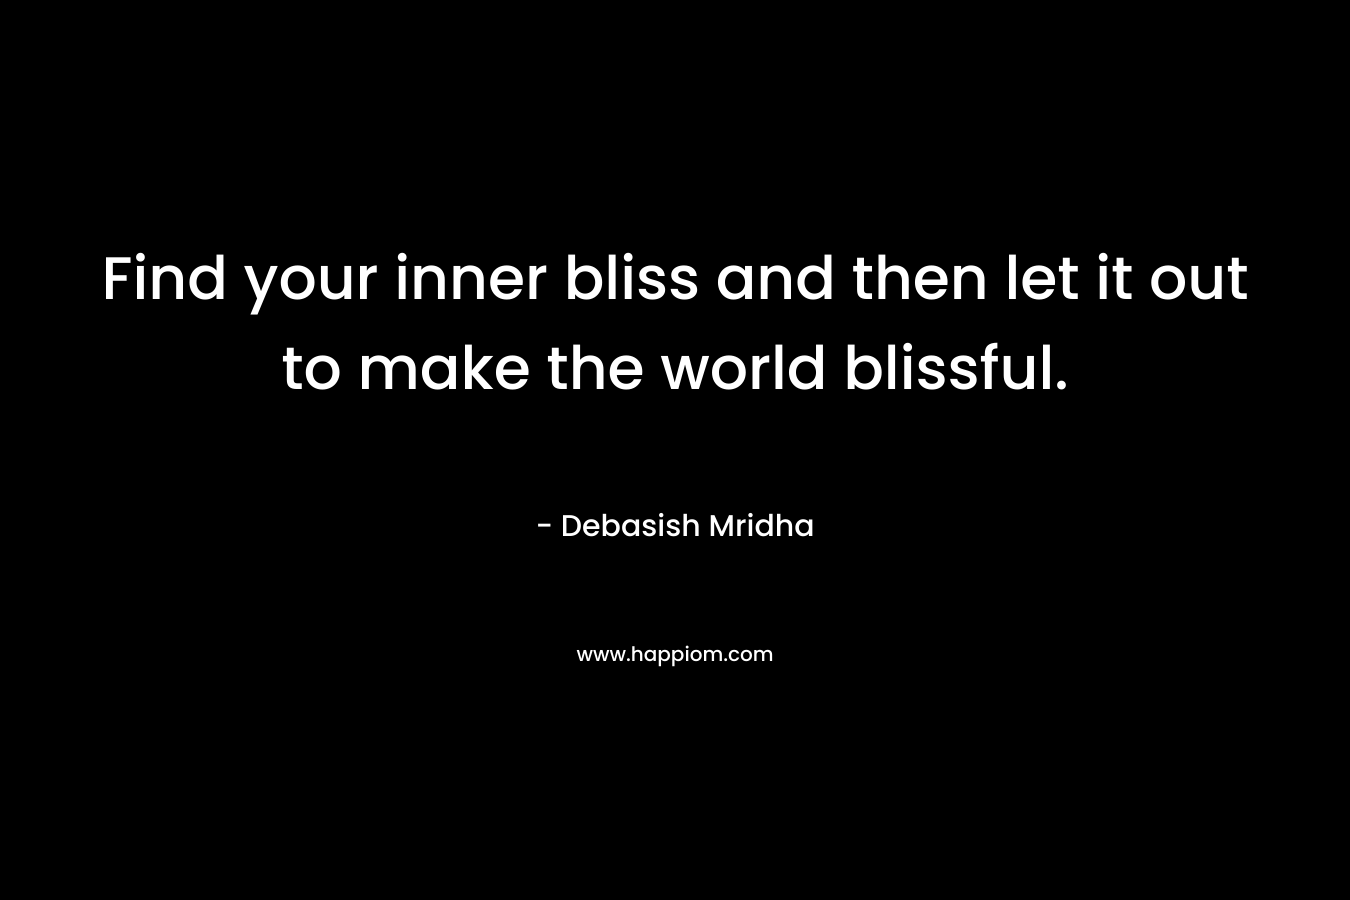 Find your inner bliss and then let it out to make the world blissful.